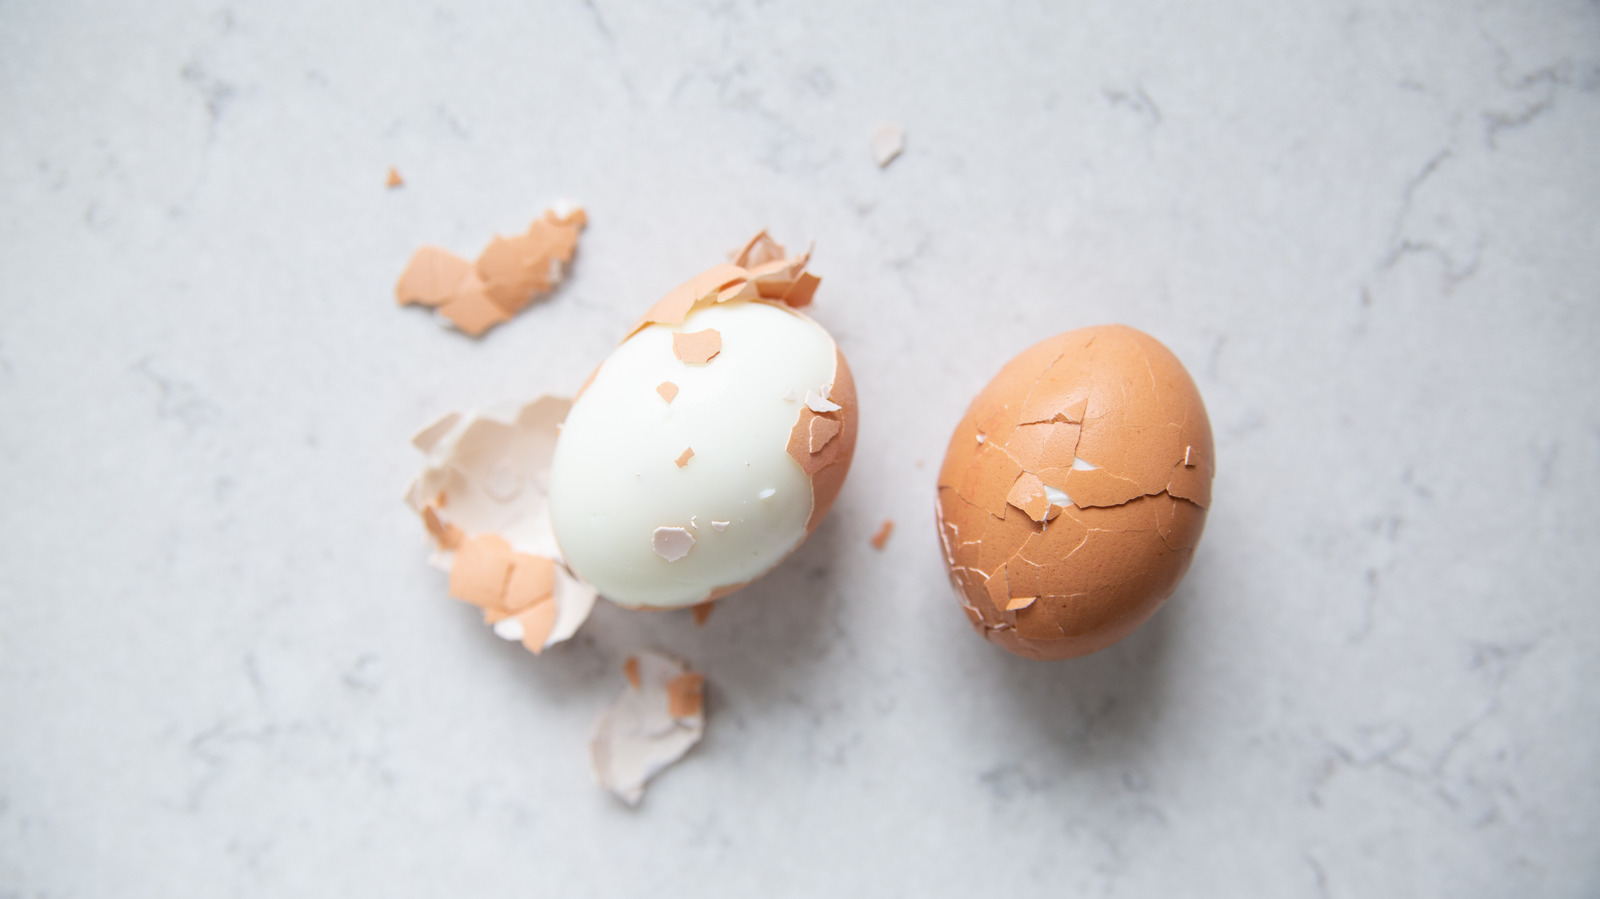 https://www.thedailymeal.com/img/gallery/12-ways-to-easily-peel-hard-boiled-eggs/l-intro-1676402297.jpg